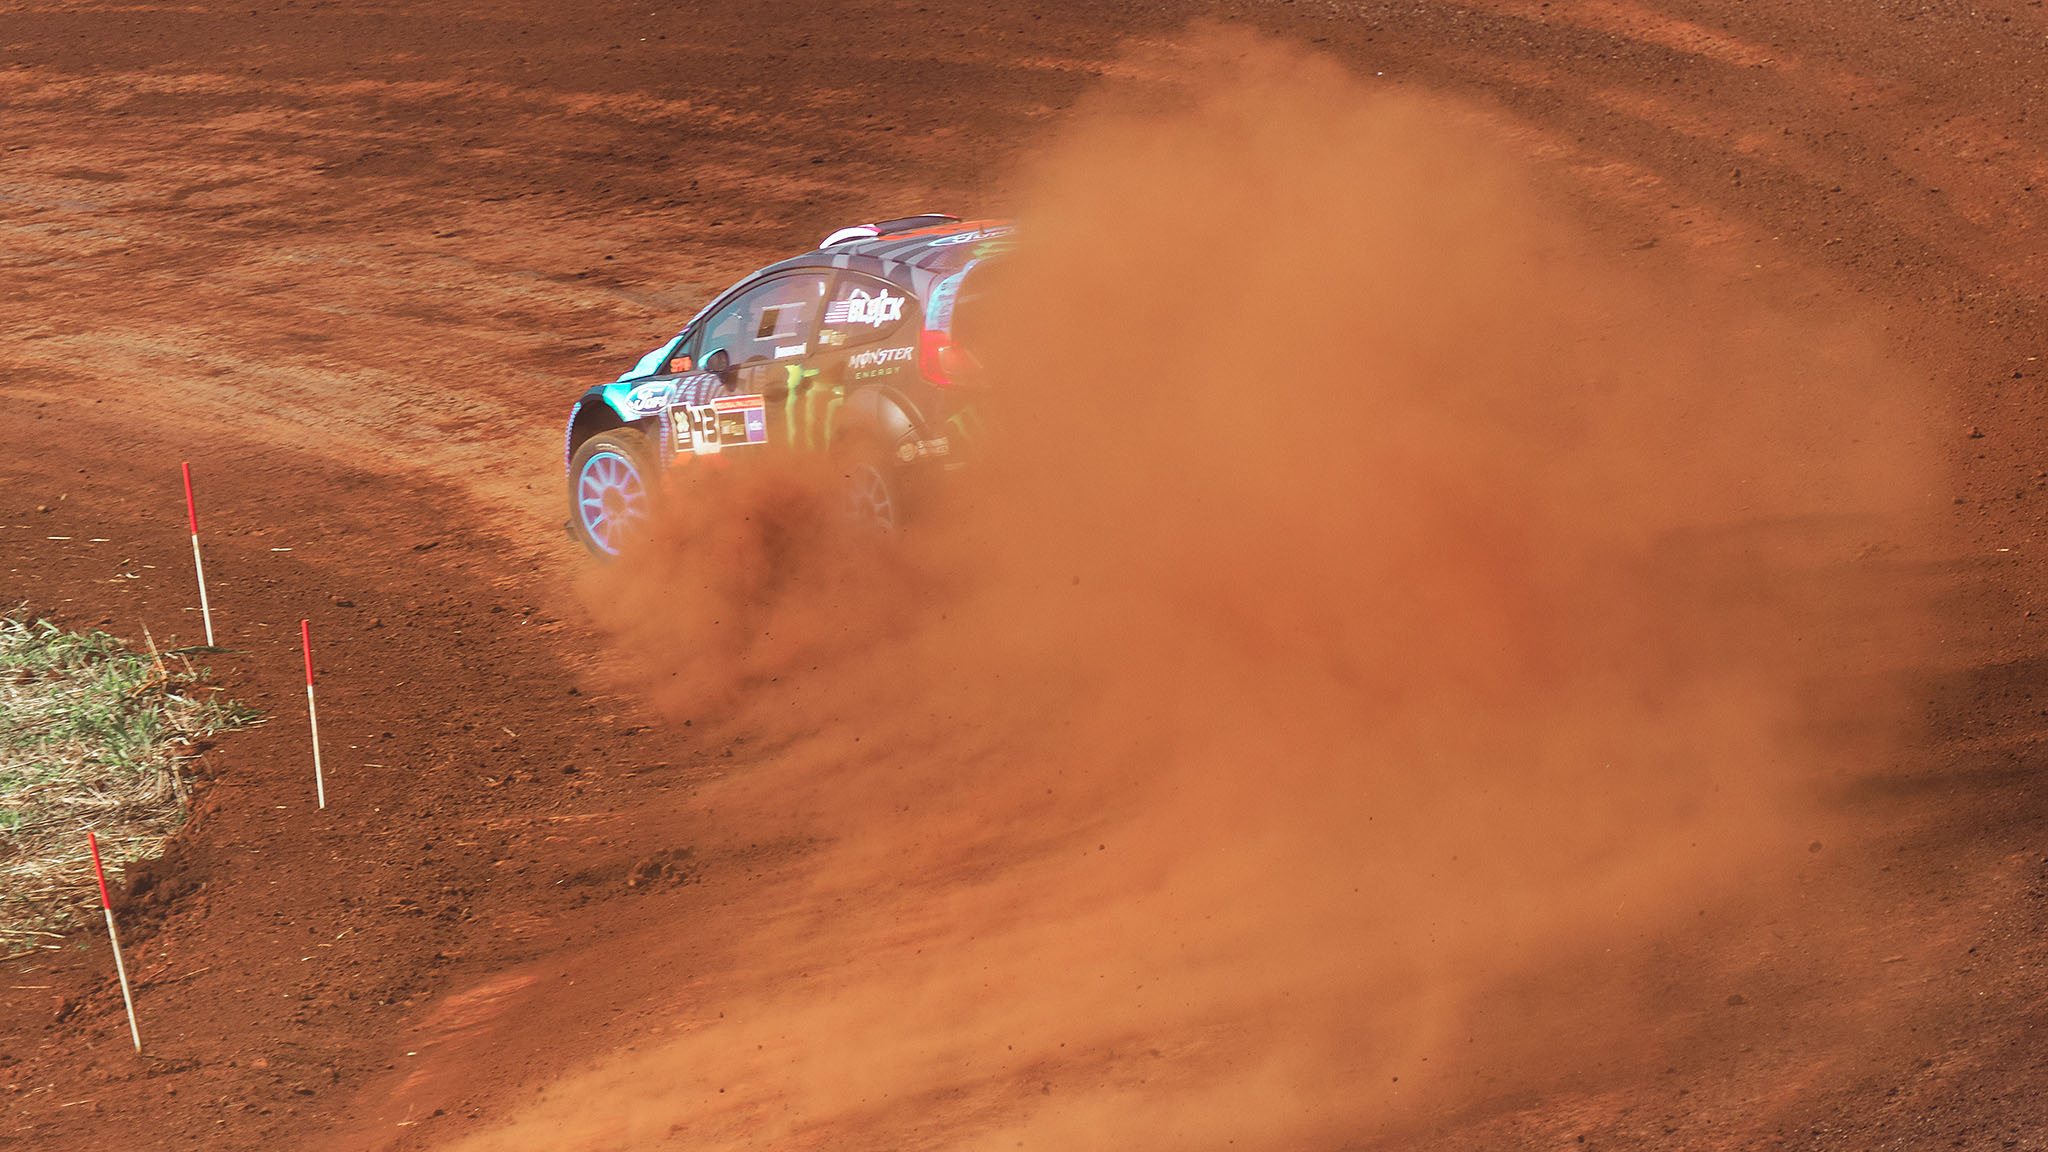 The RallyCross field that assembled in Foz do Iguau for the first international X Games RallyCross competition included pro drivers from Formula One, IndyCar, NASCAR, off-road trucks, rally and motocross.